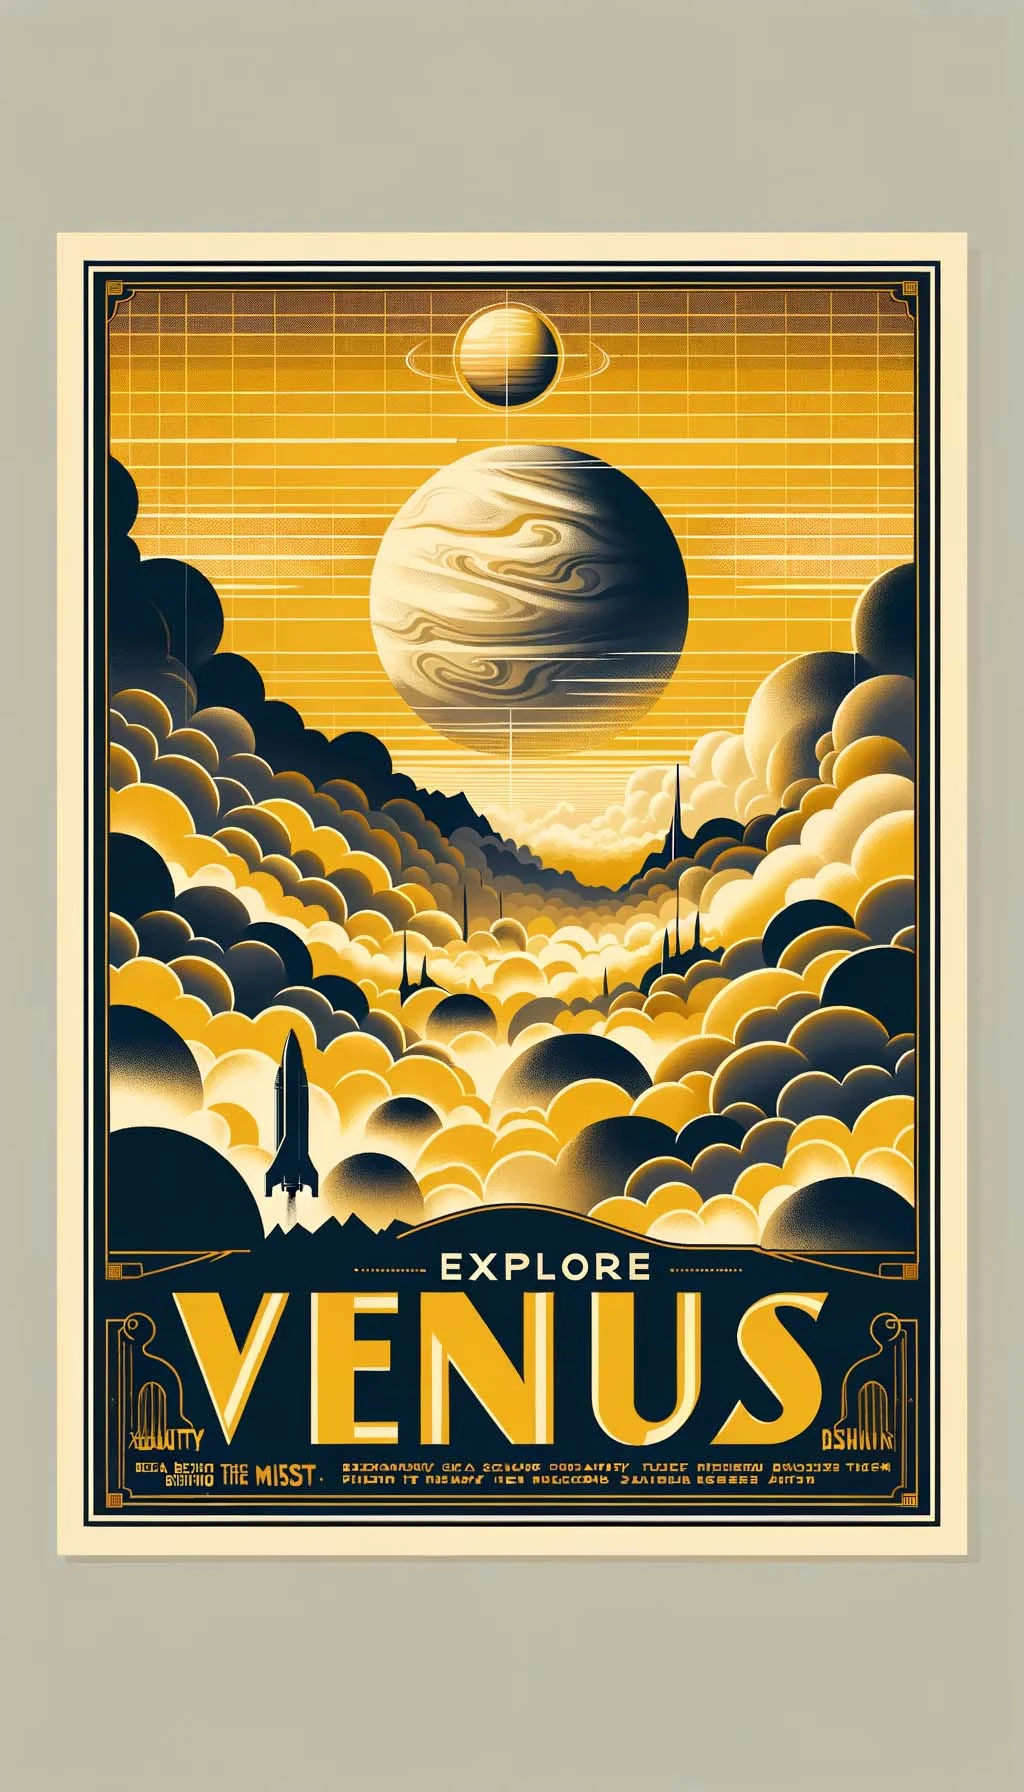 Art deco style poster advertising travel to Venus, featuring stylized clouds and mountain landscapes in shades of yellow and orange with celestial bodies in the background.